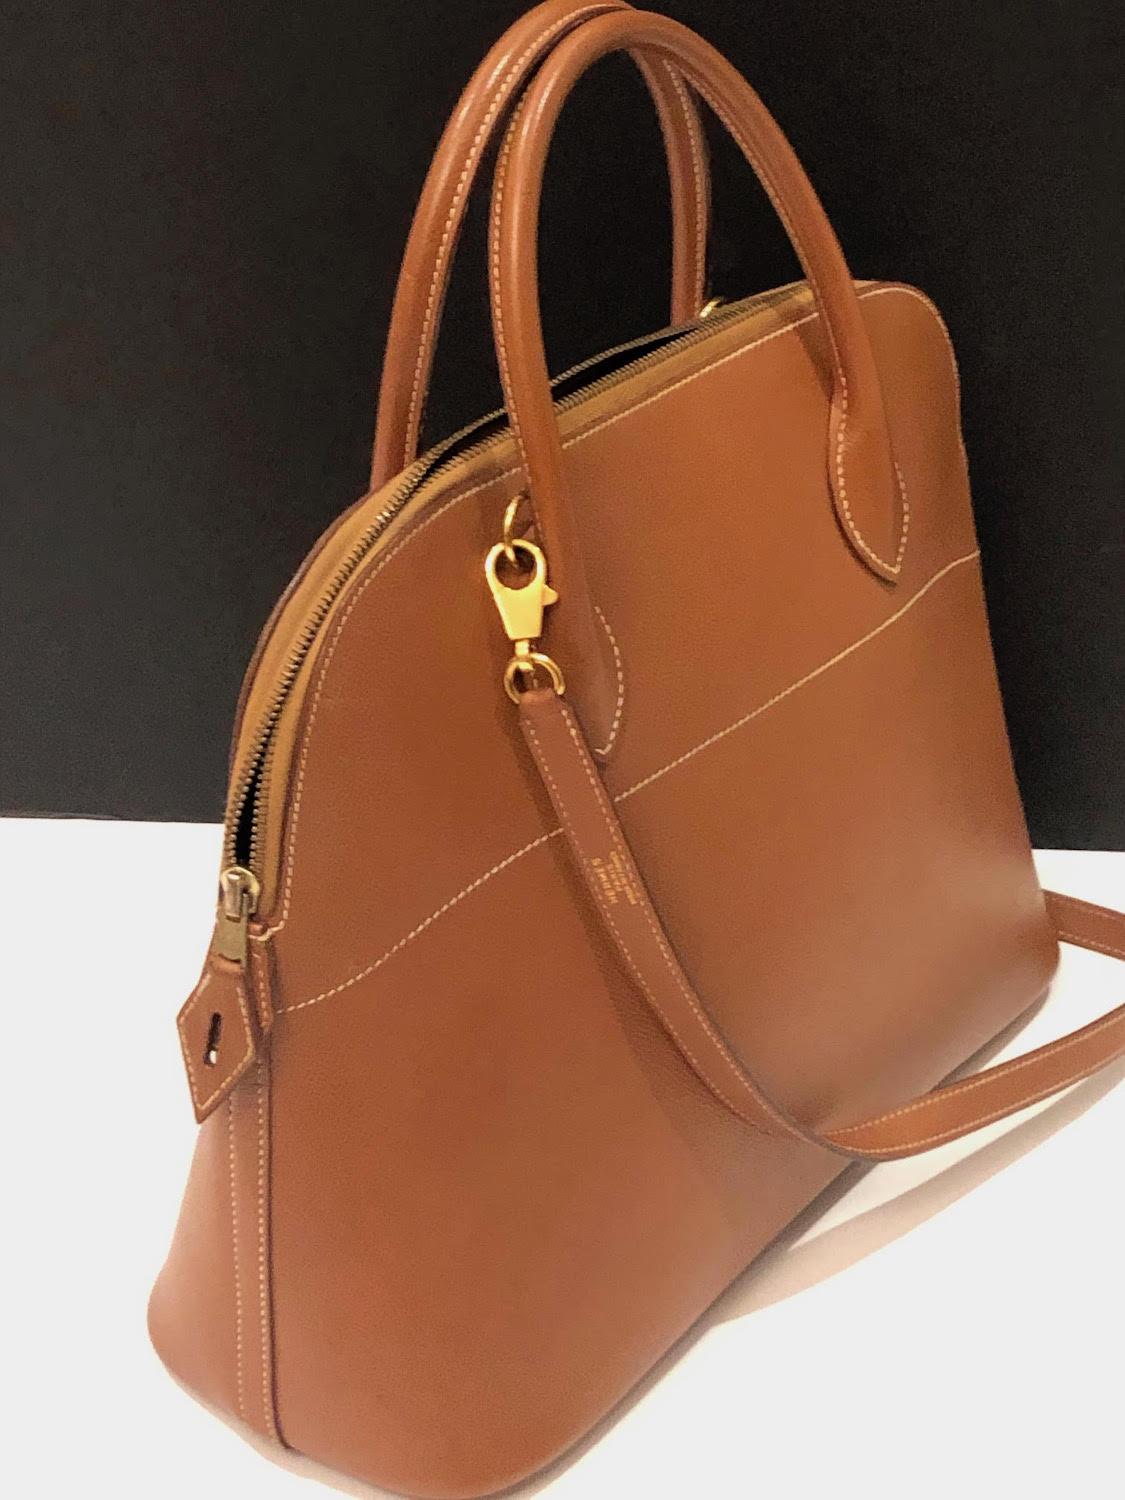 HERMÈS Bolide 1995 Tan Leather Bag GHW Vintage In Good Condition For Sale In London, GB